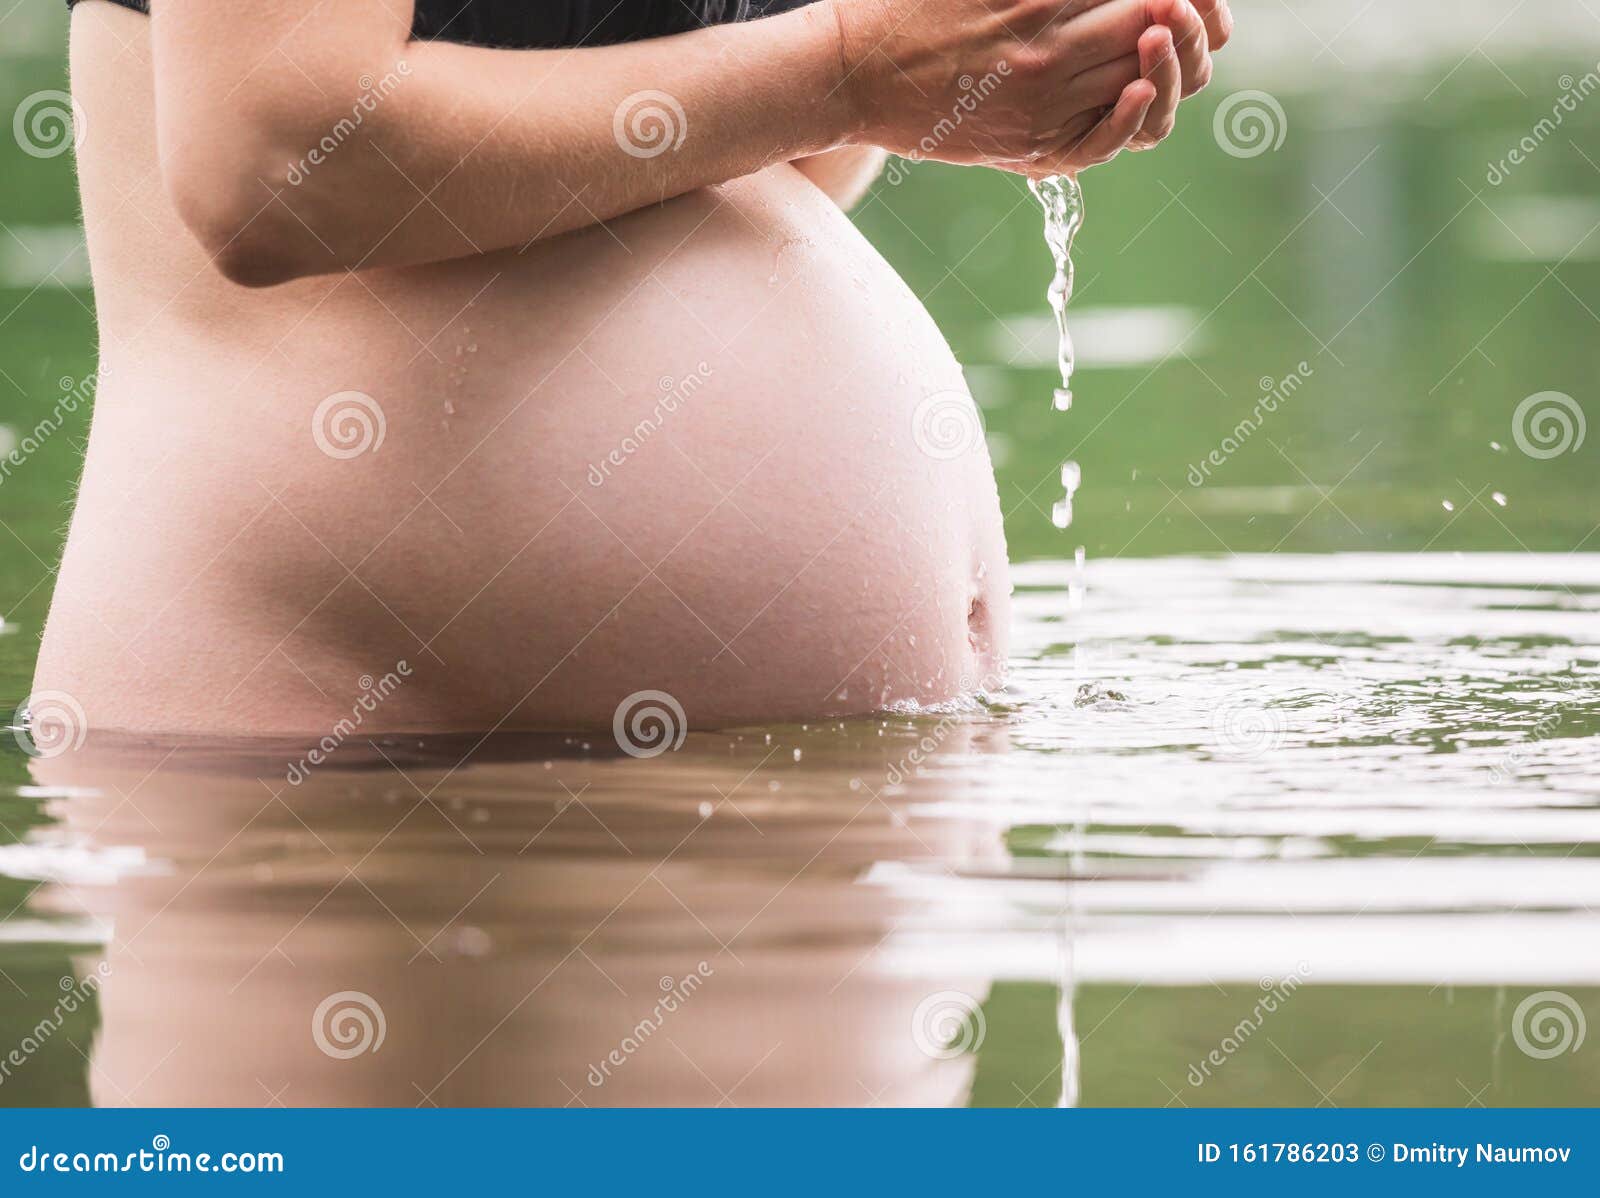 Pregnant Woman Pouring Water on Her Belly Bathing Outdoor Stock